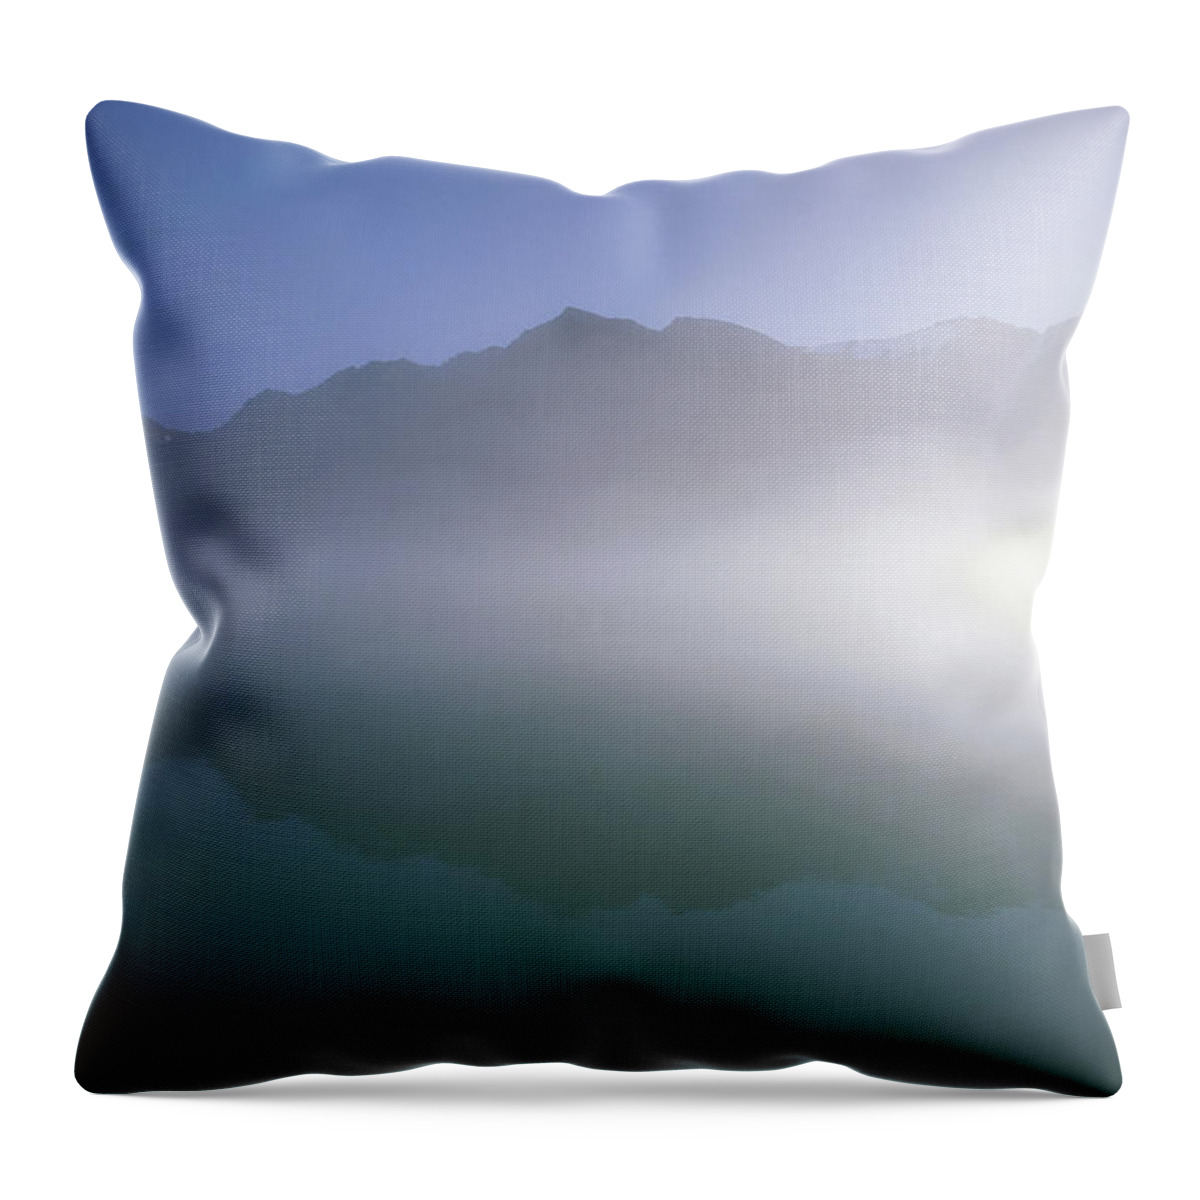 Feb0514 Throw Pillow featuring the photograph Kross Fjord In Fog Spitsbergen Island by Tui De Roy